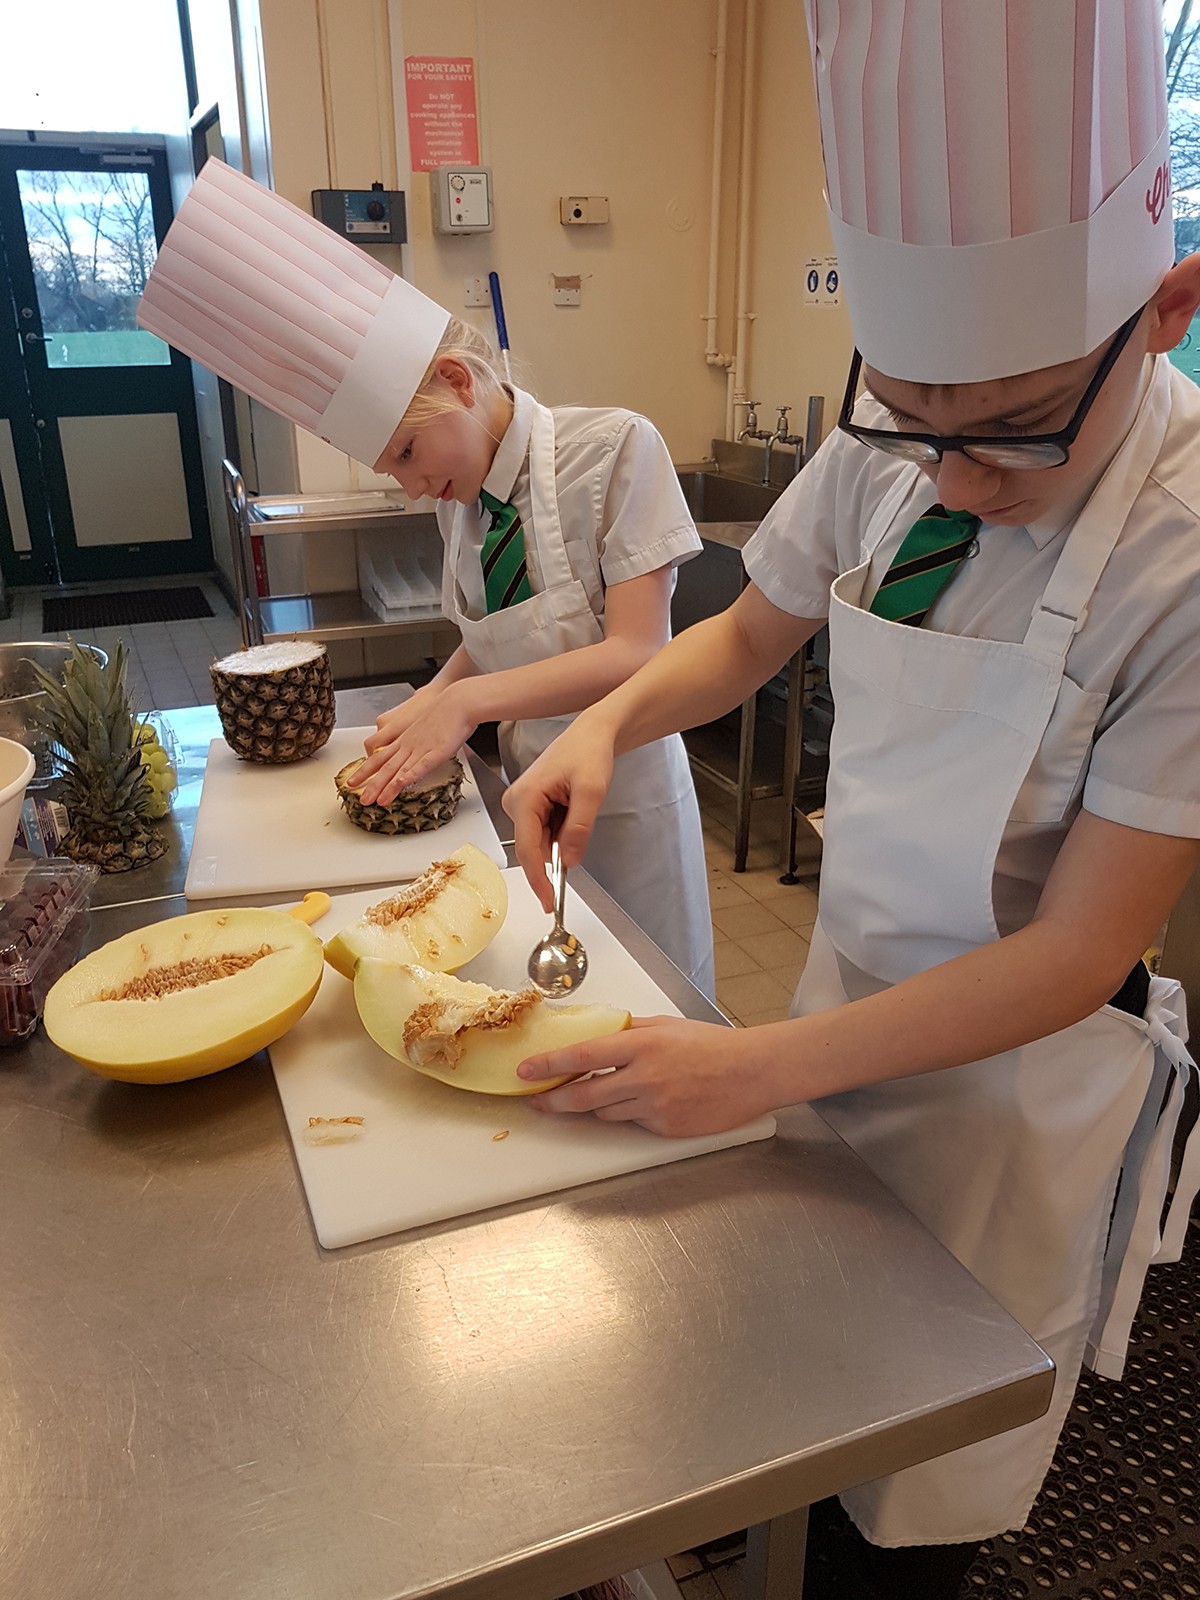 Woodham Academy’s Lets Get Cooking Club